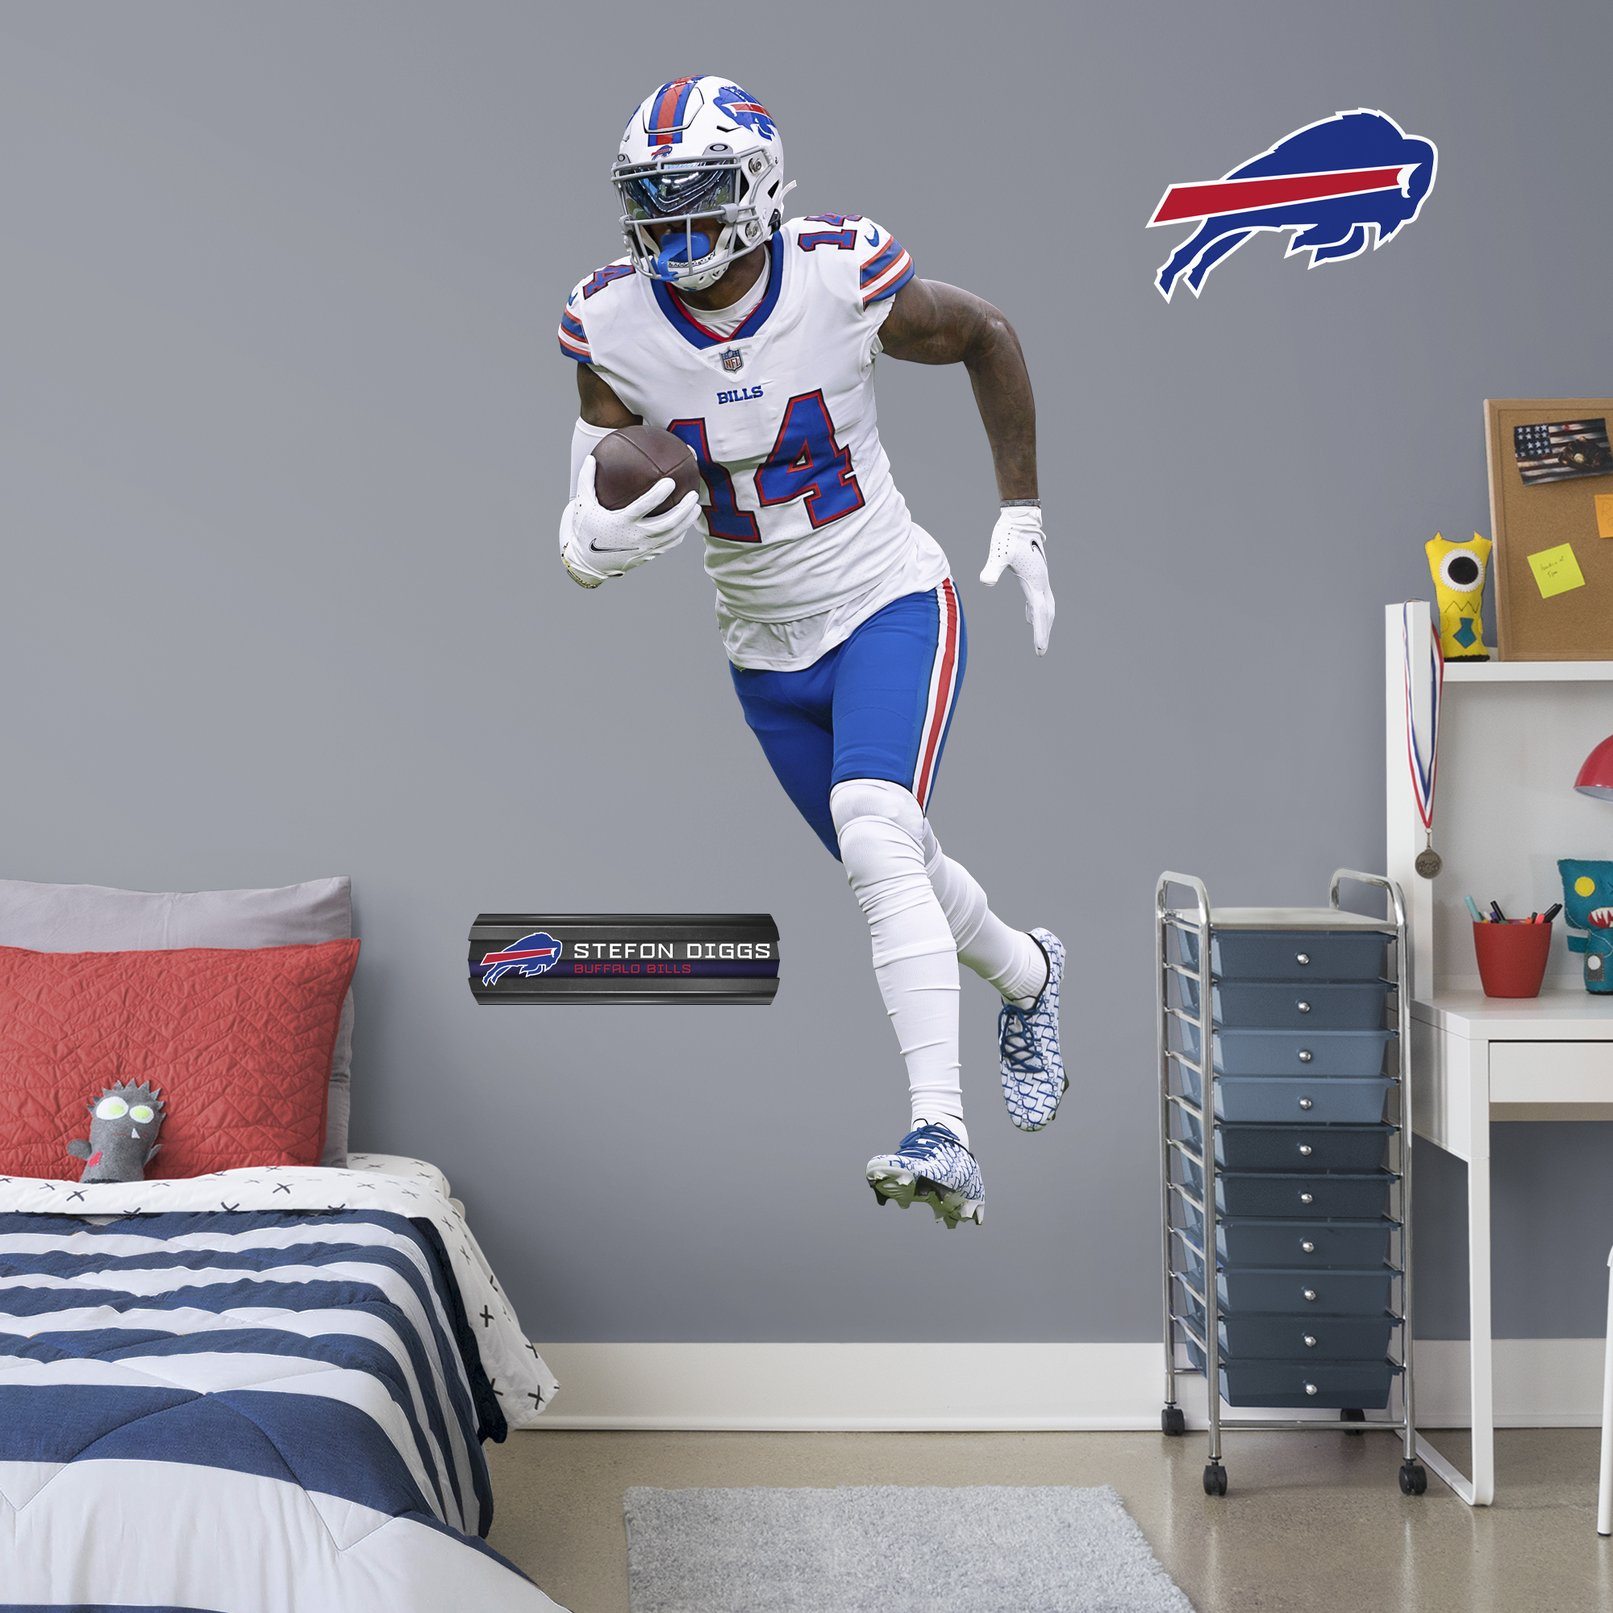 https://fathead.com/products/m1900-01759-001?variant=33610556342360